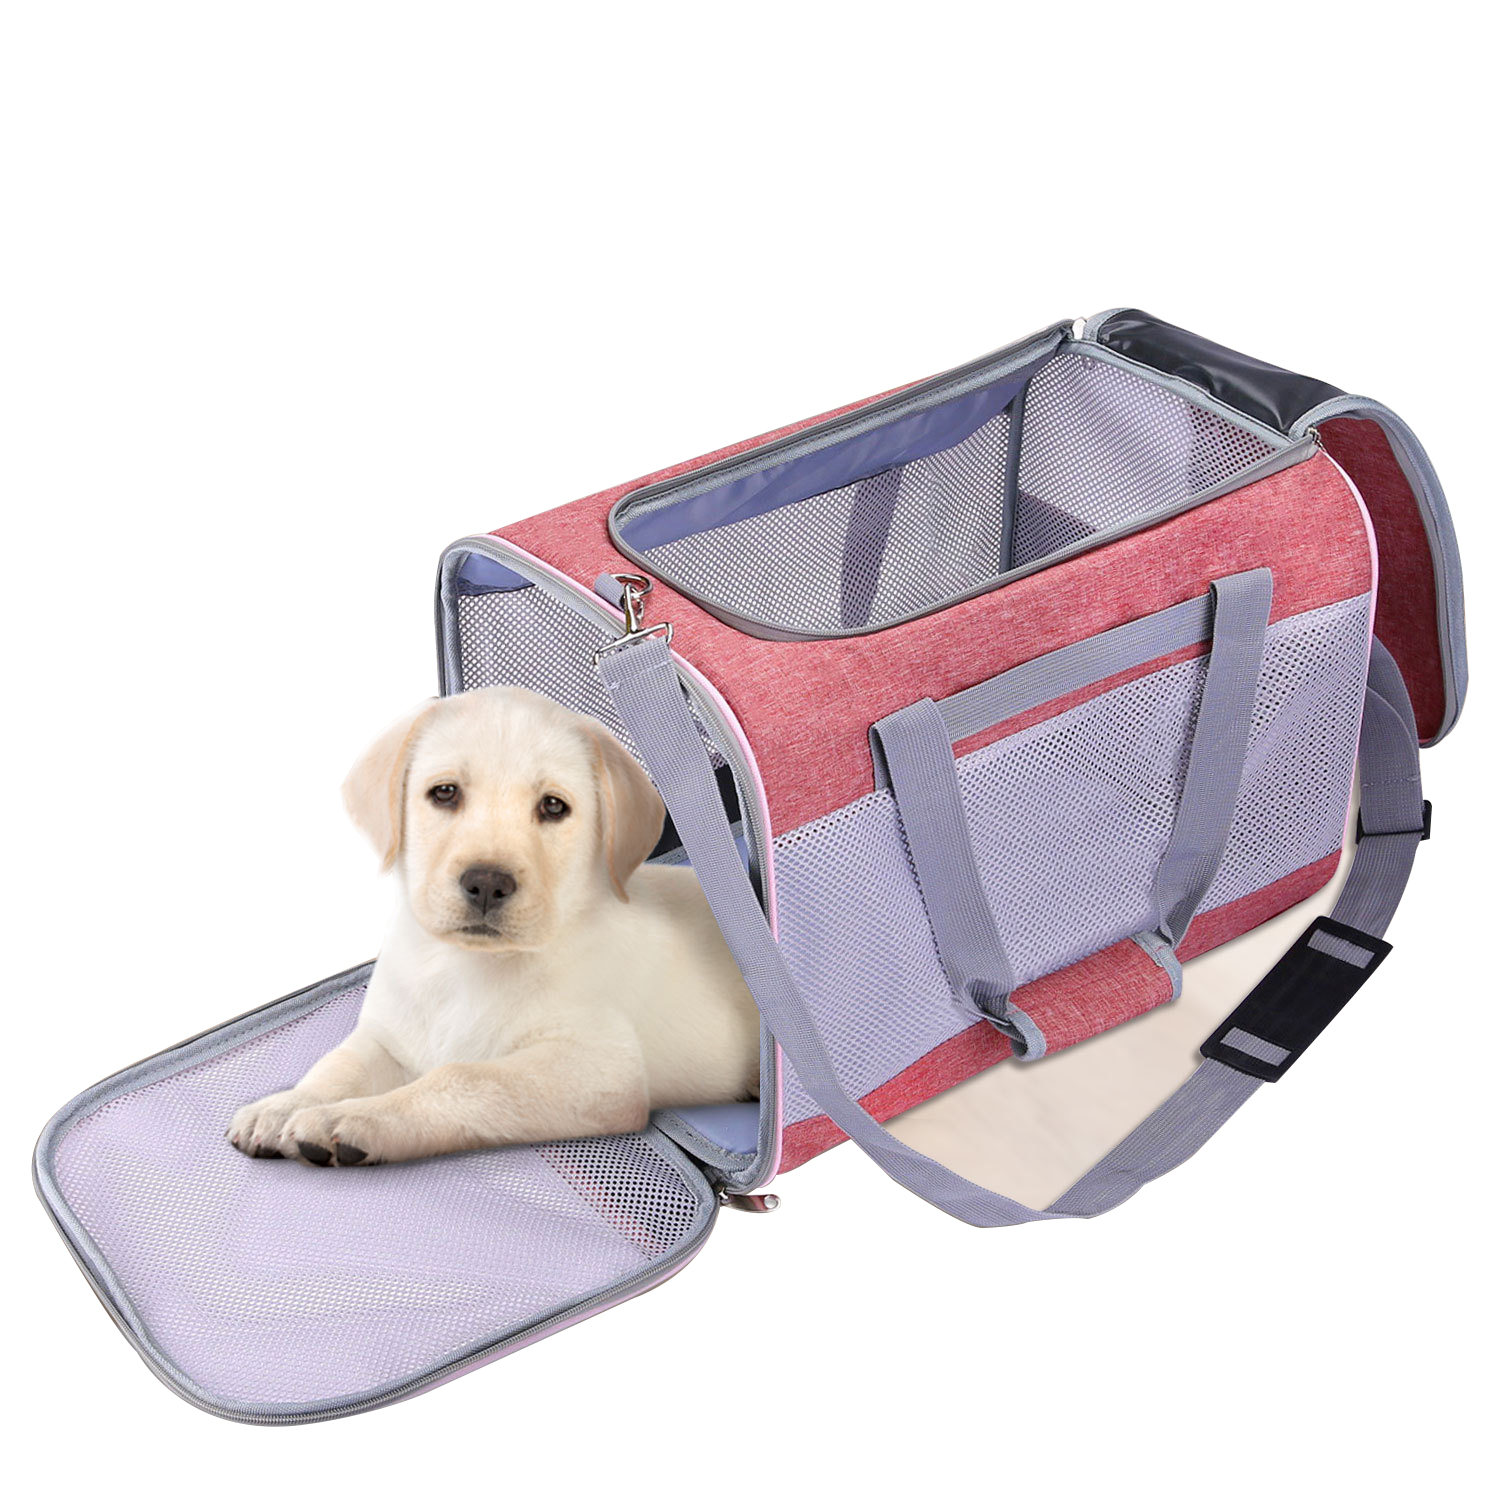 Breathable High Quality Oxford Cloth Foldable Dog Bag Pet Mesh Pet Carrying Case